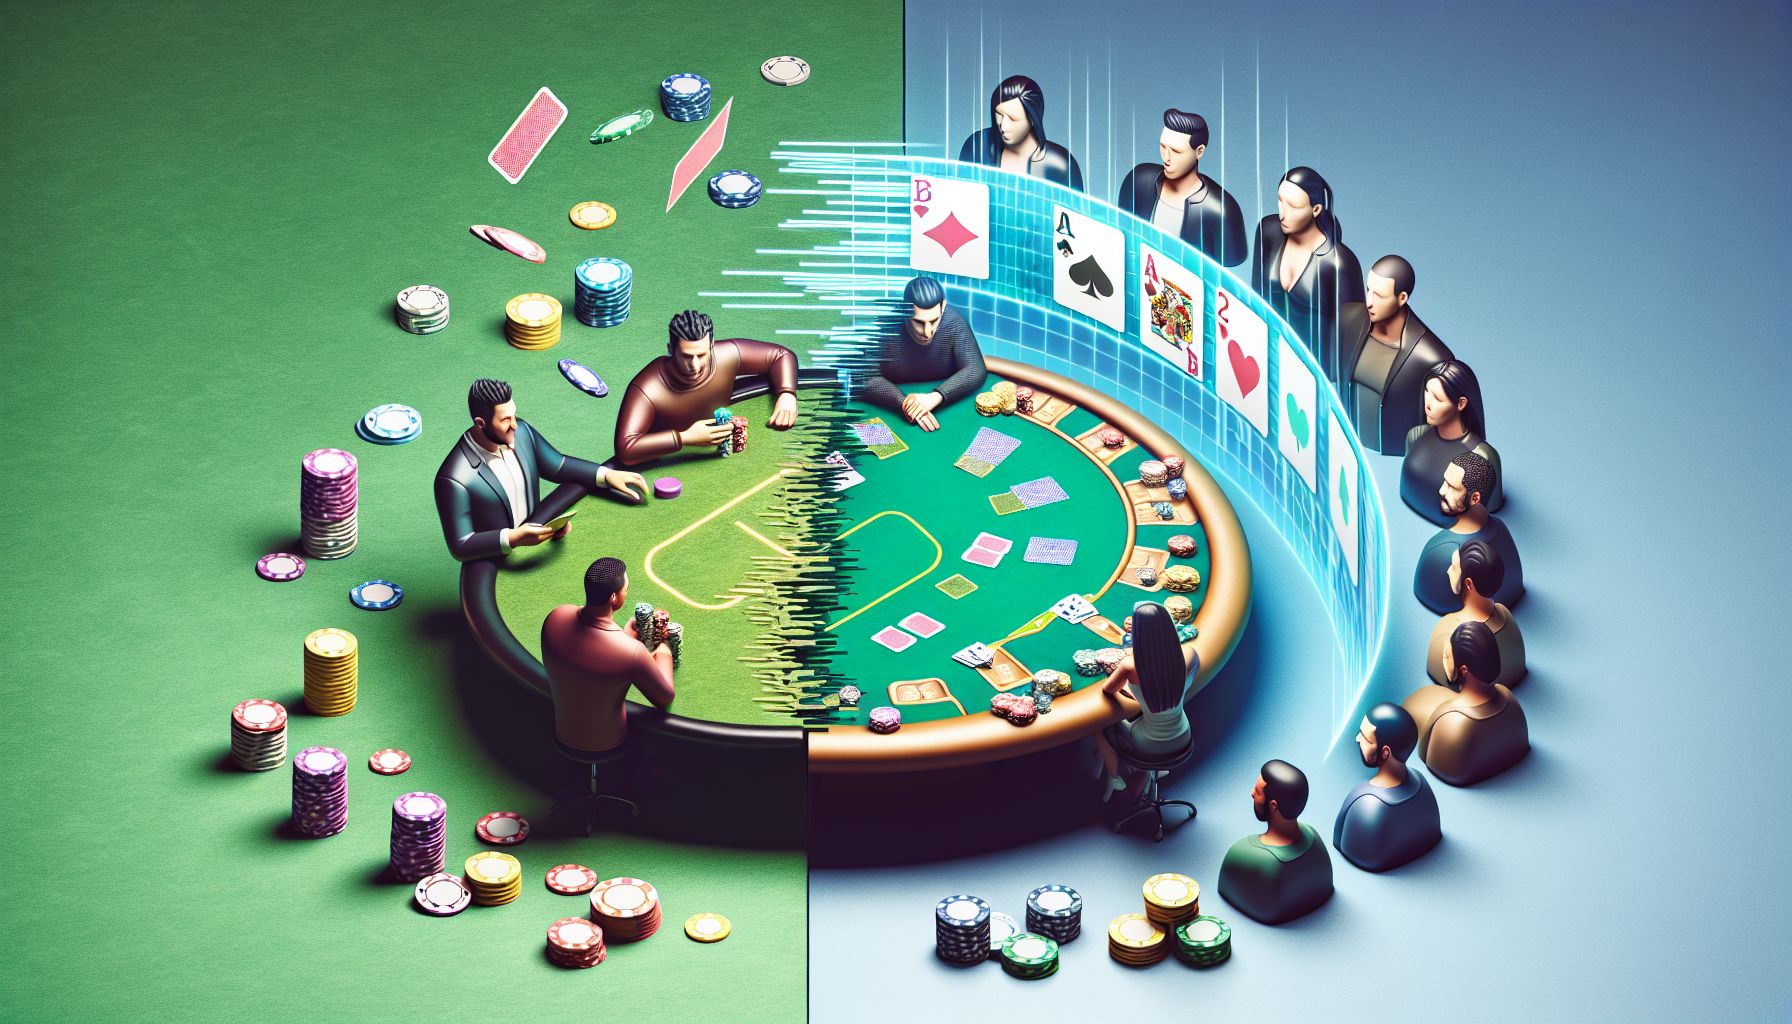 Digital vs. Physical: The Changing Landscape of Casino Poker